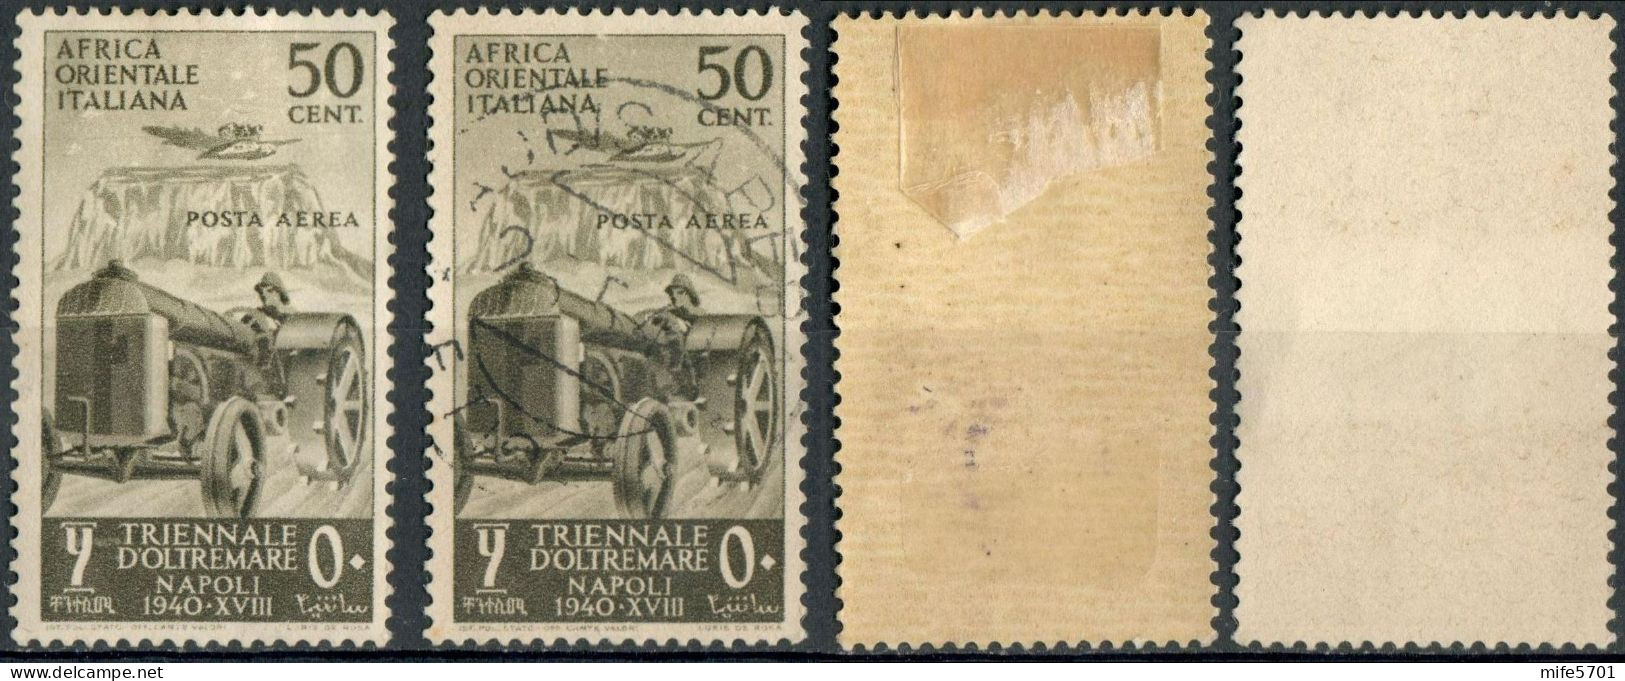 REGNO AFRICA ORIENTALE ITALIANA 1940 A.O.I. P.A. 1ª MOSTRA TRIENNALE D'OLTREMARE C. 50 NUOVO (MLH) E USATO SASSONE A16 - Italiaans Oost-Afrika